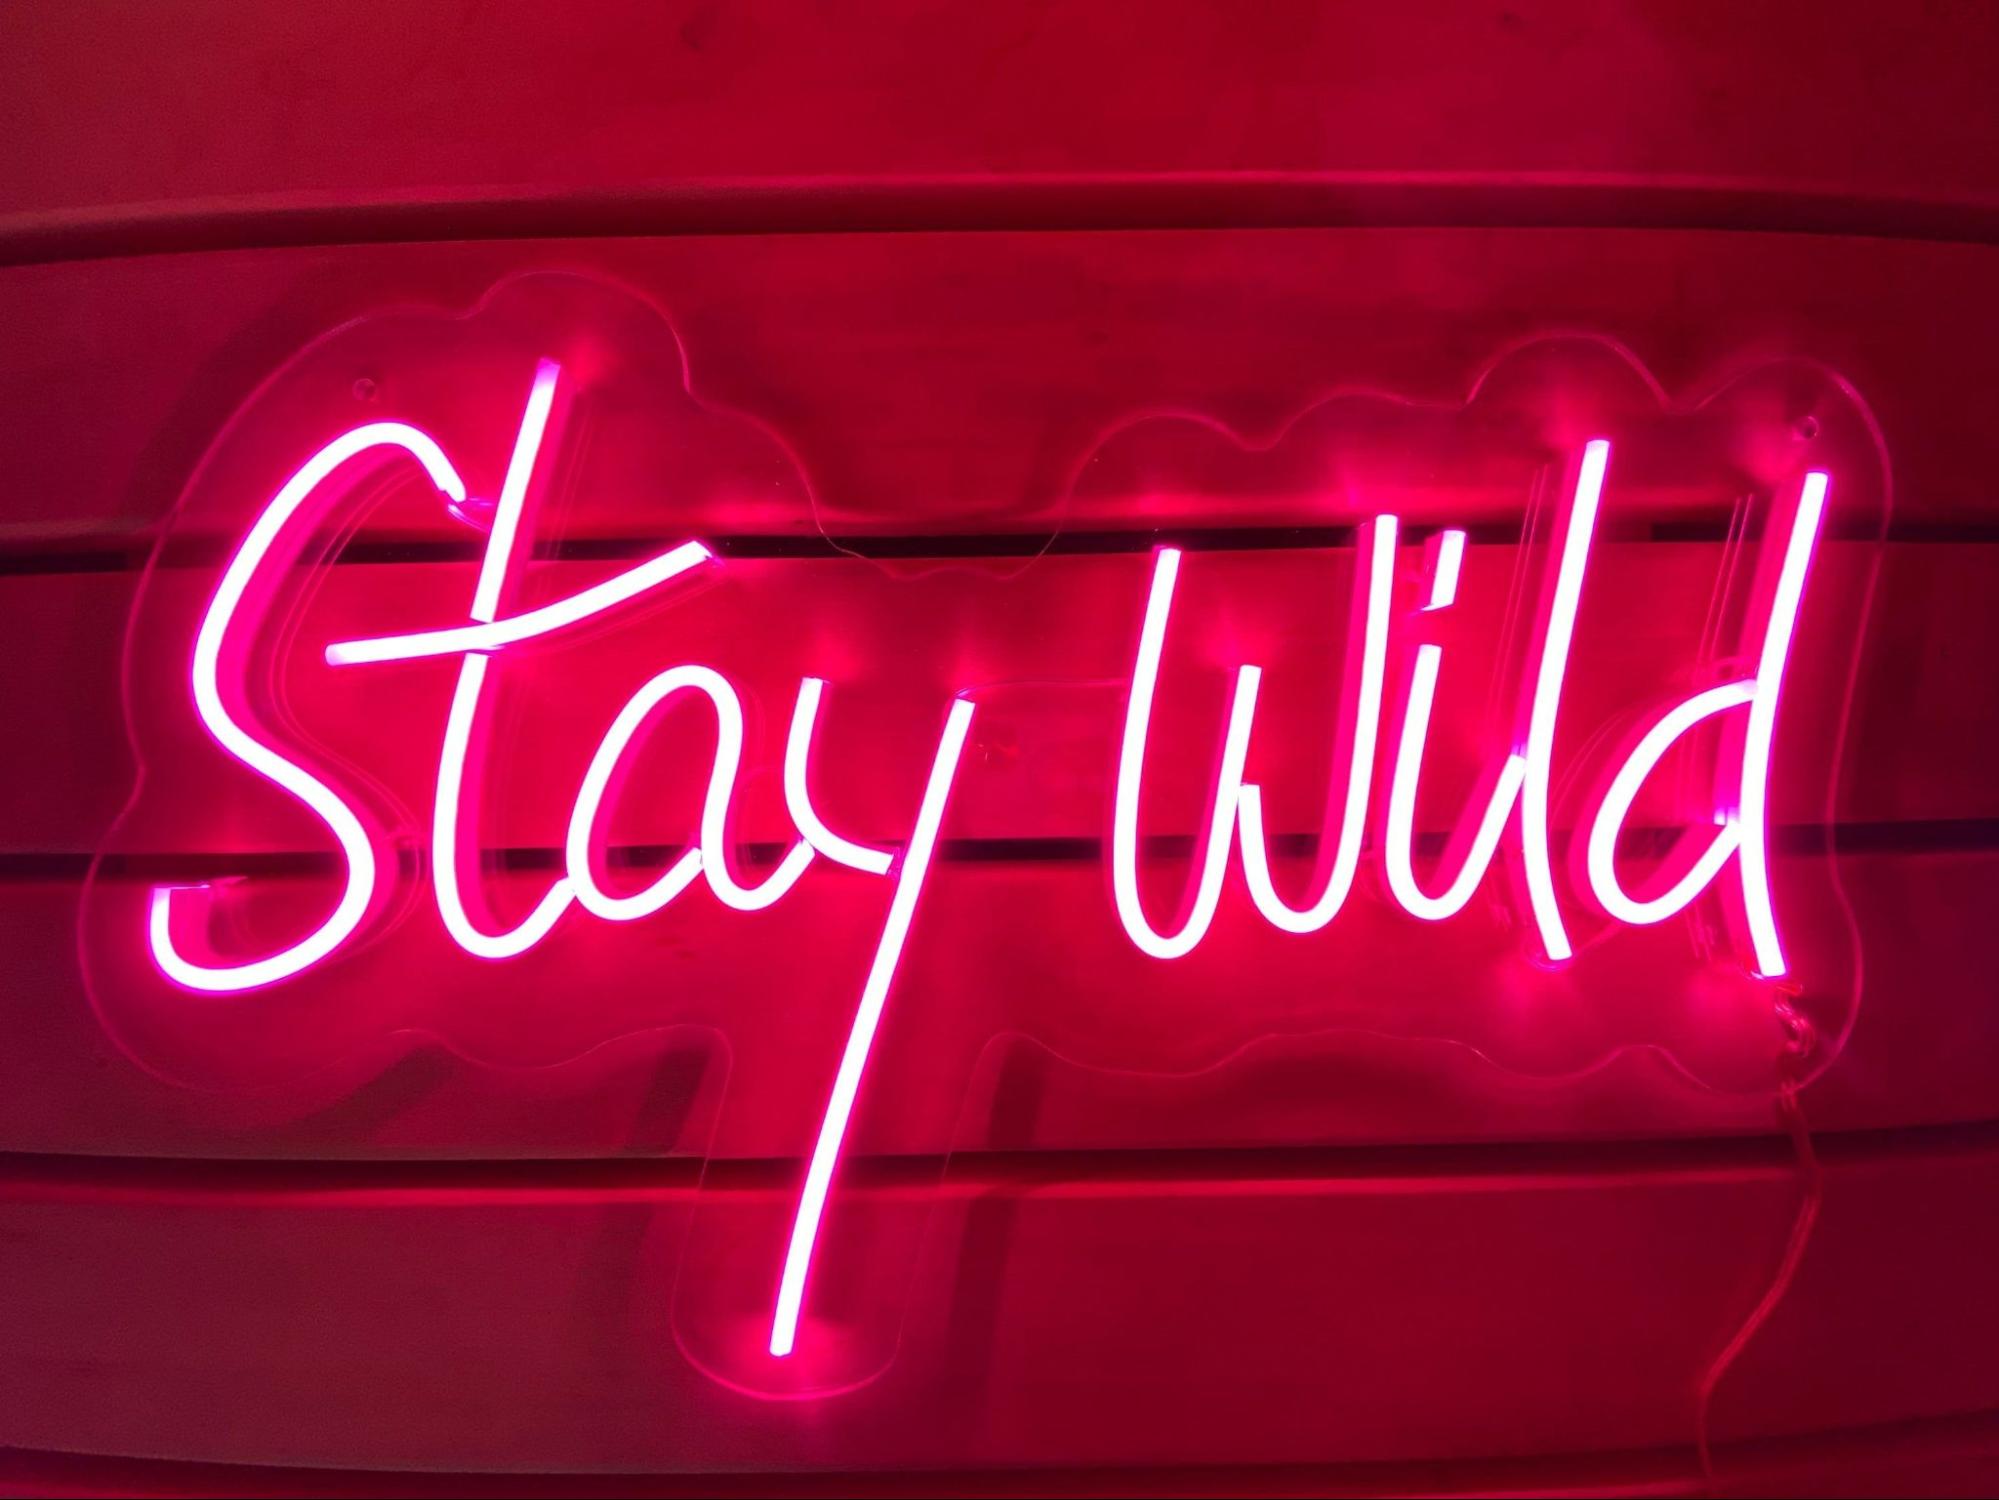 “Stay Wild” Neon Lights for Teenager’s Room